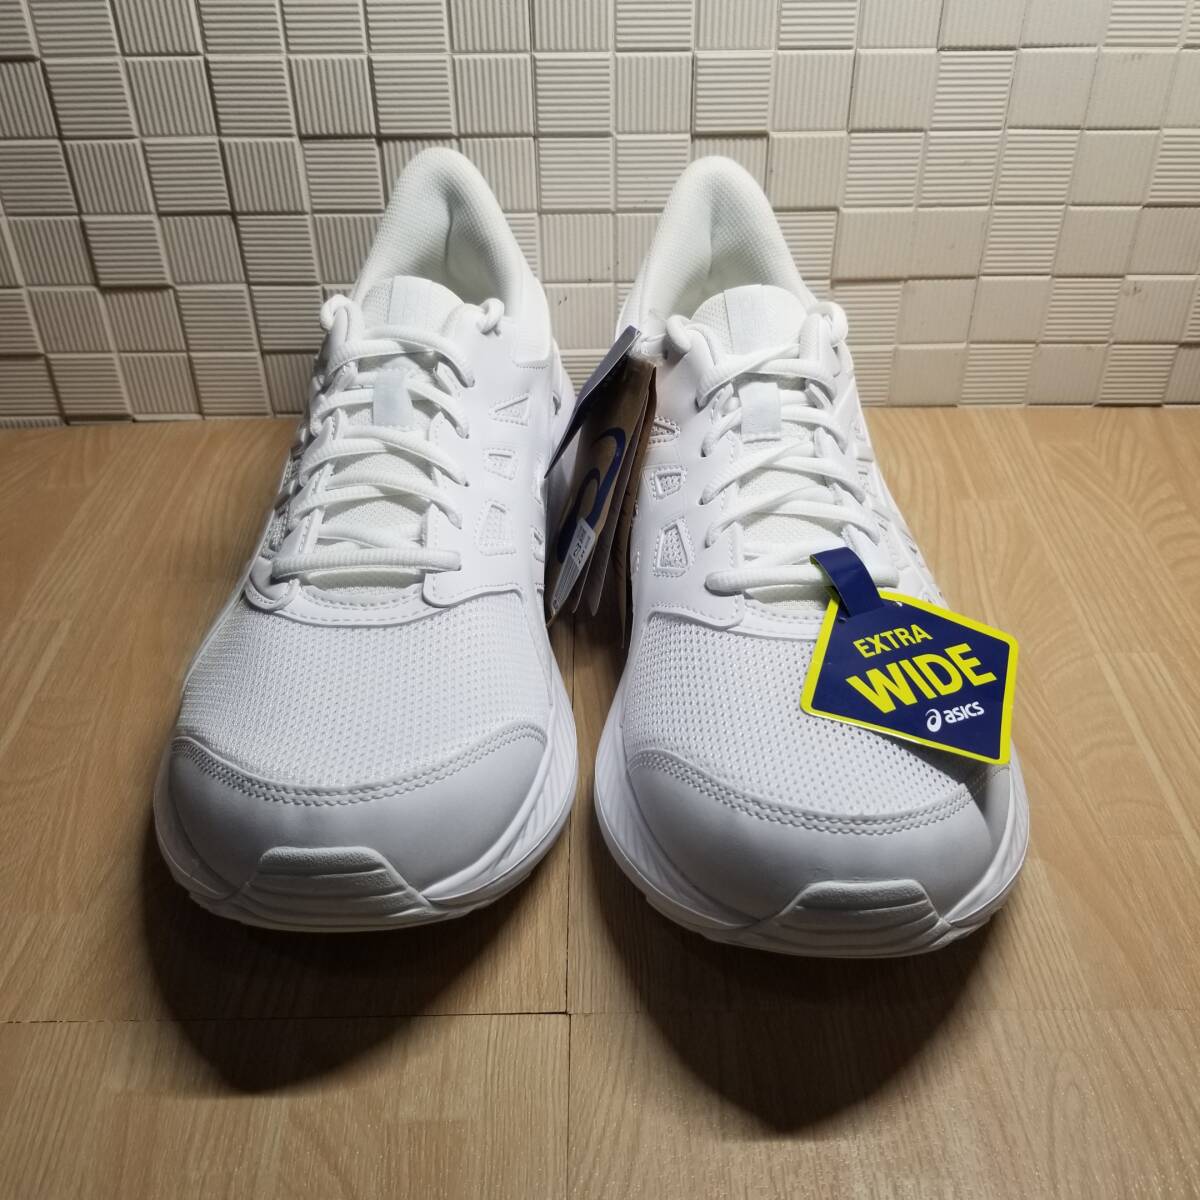  free shipping * new goods unused!! Asics ASICS running shoes sneakers / JOLT 4 EXTRA WIDE/ white white 25.5cm